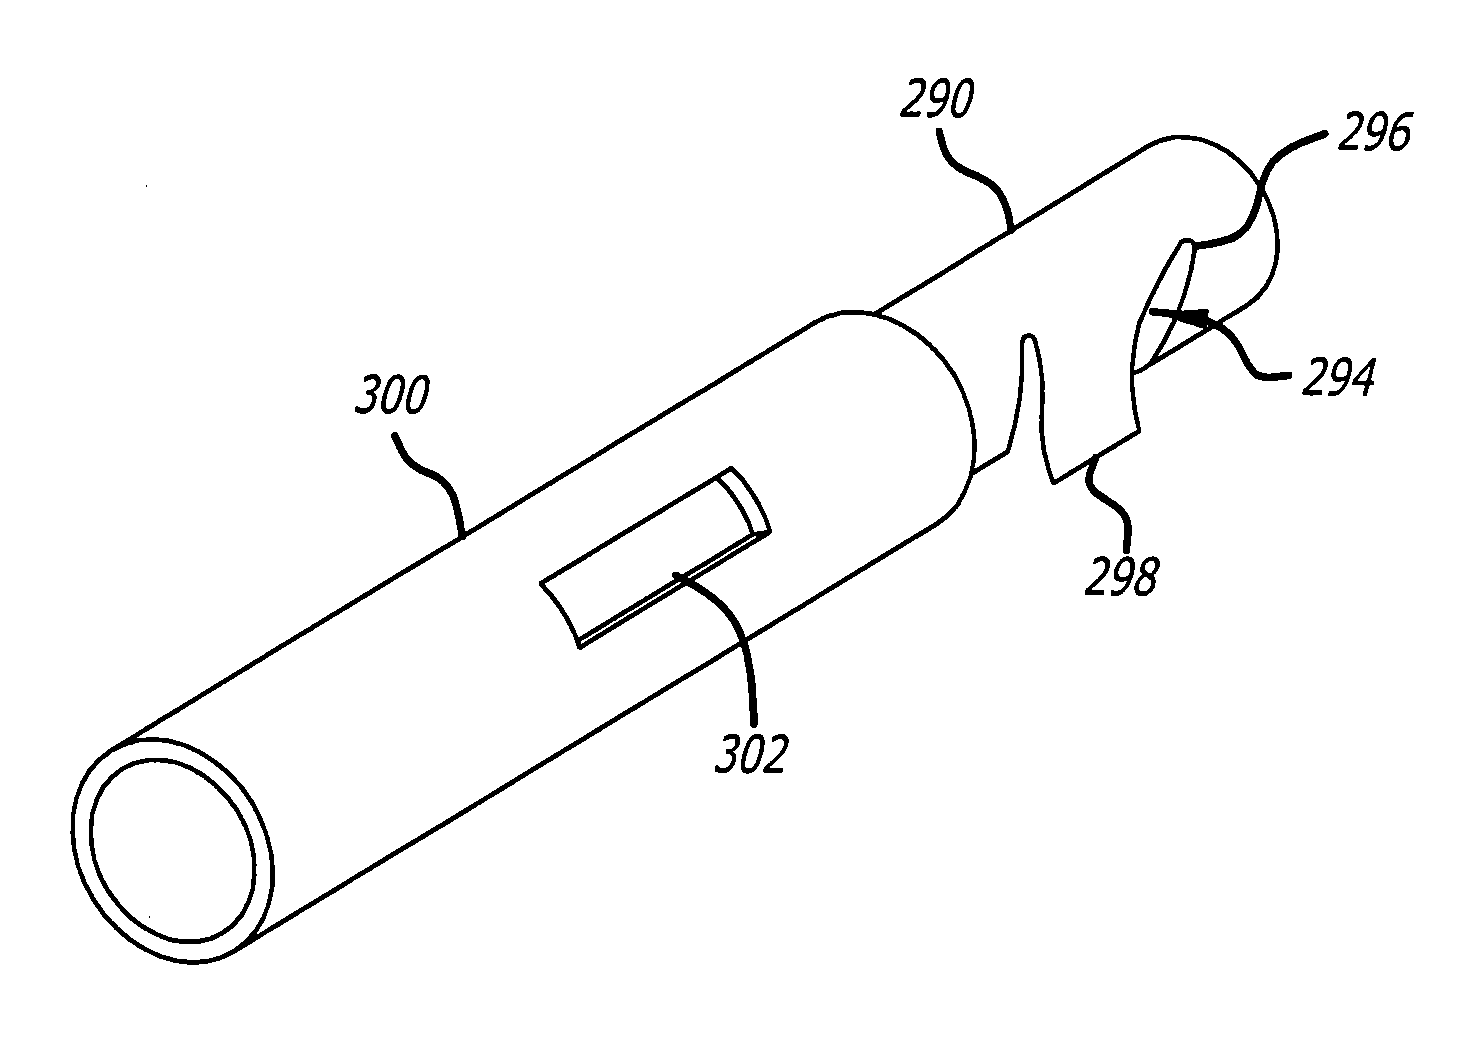 Insertion tool for knotless suture anchor for soft tissue repair and method of use